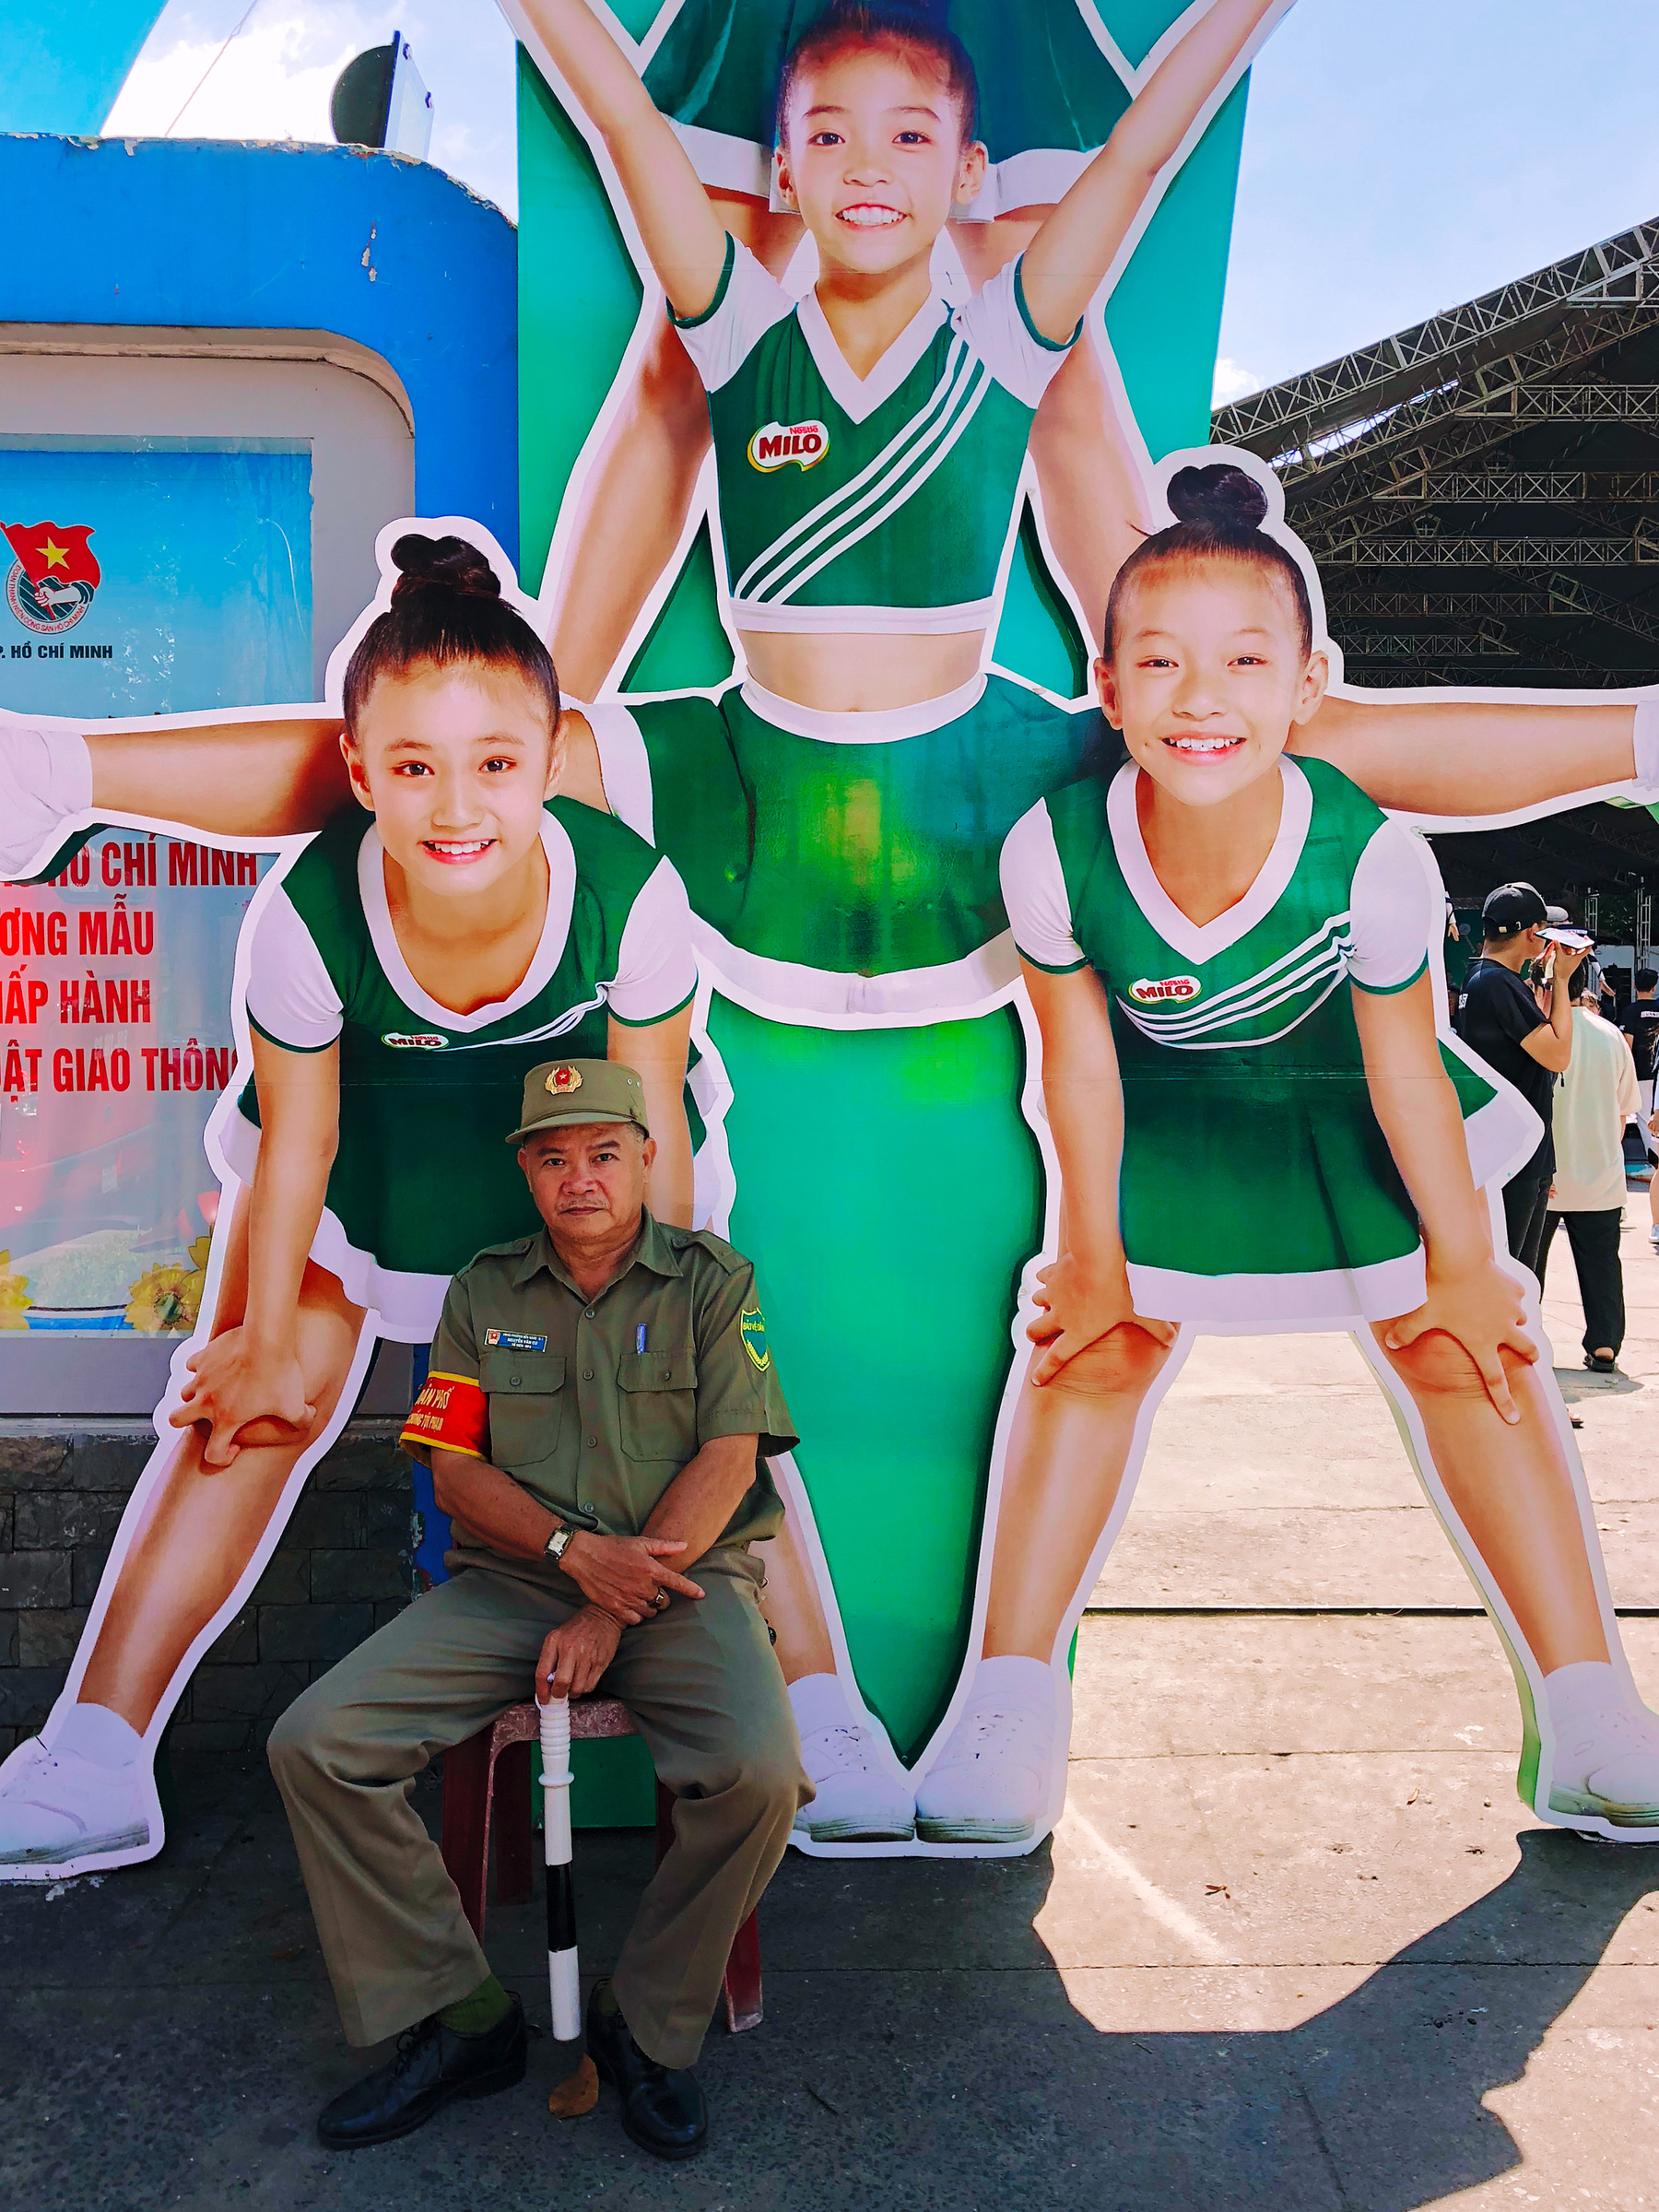 a security guard sits down in front of a cardboard cutout of three girls doing a gymnastics routine